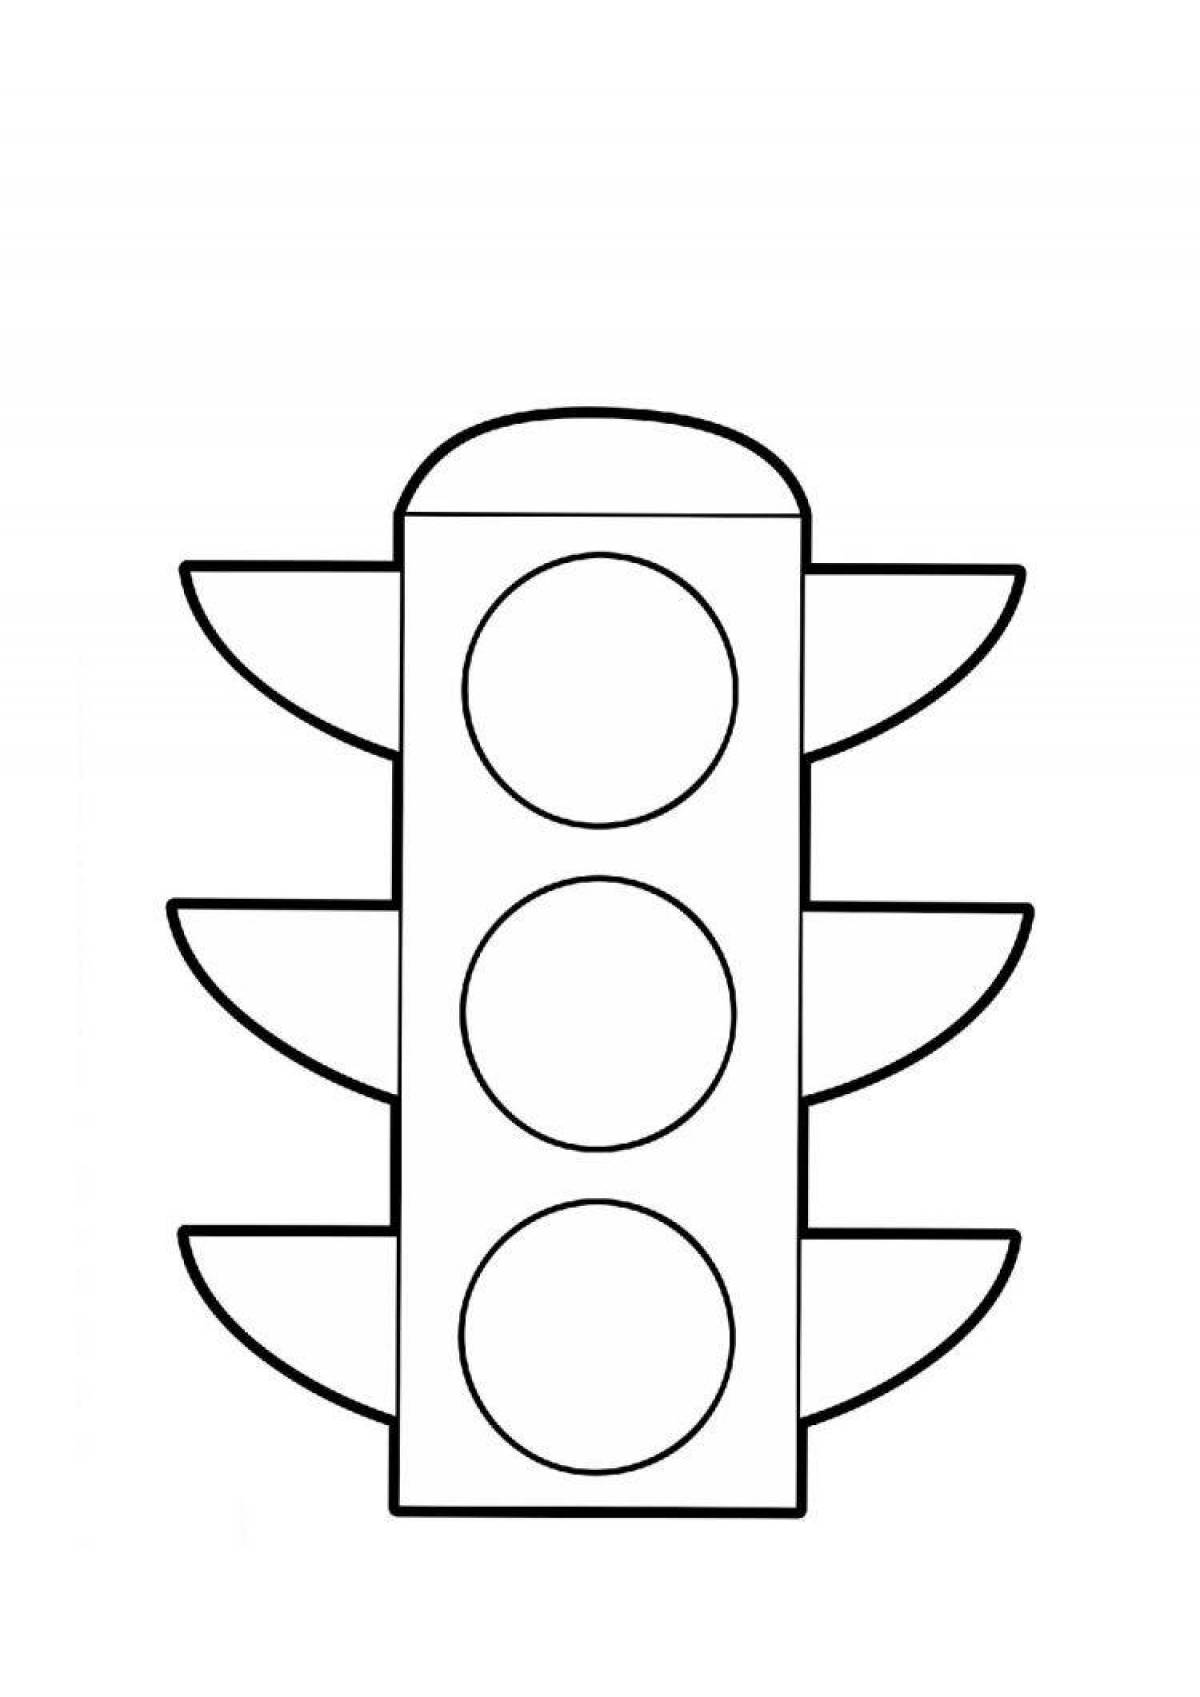 Adorable Diamond Traffic Light Coloring Page